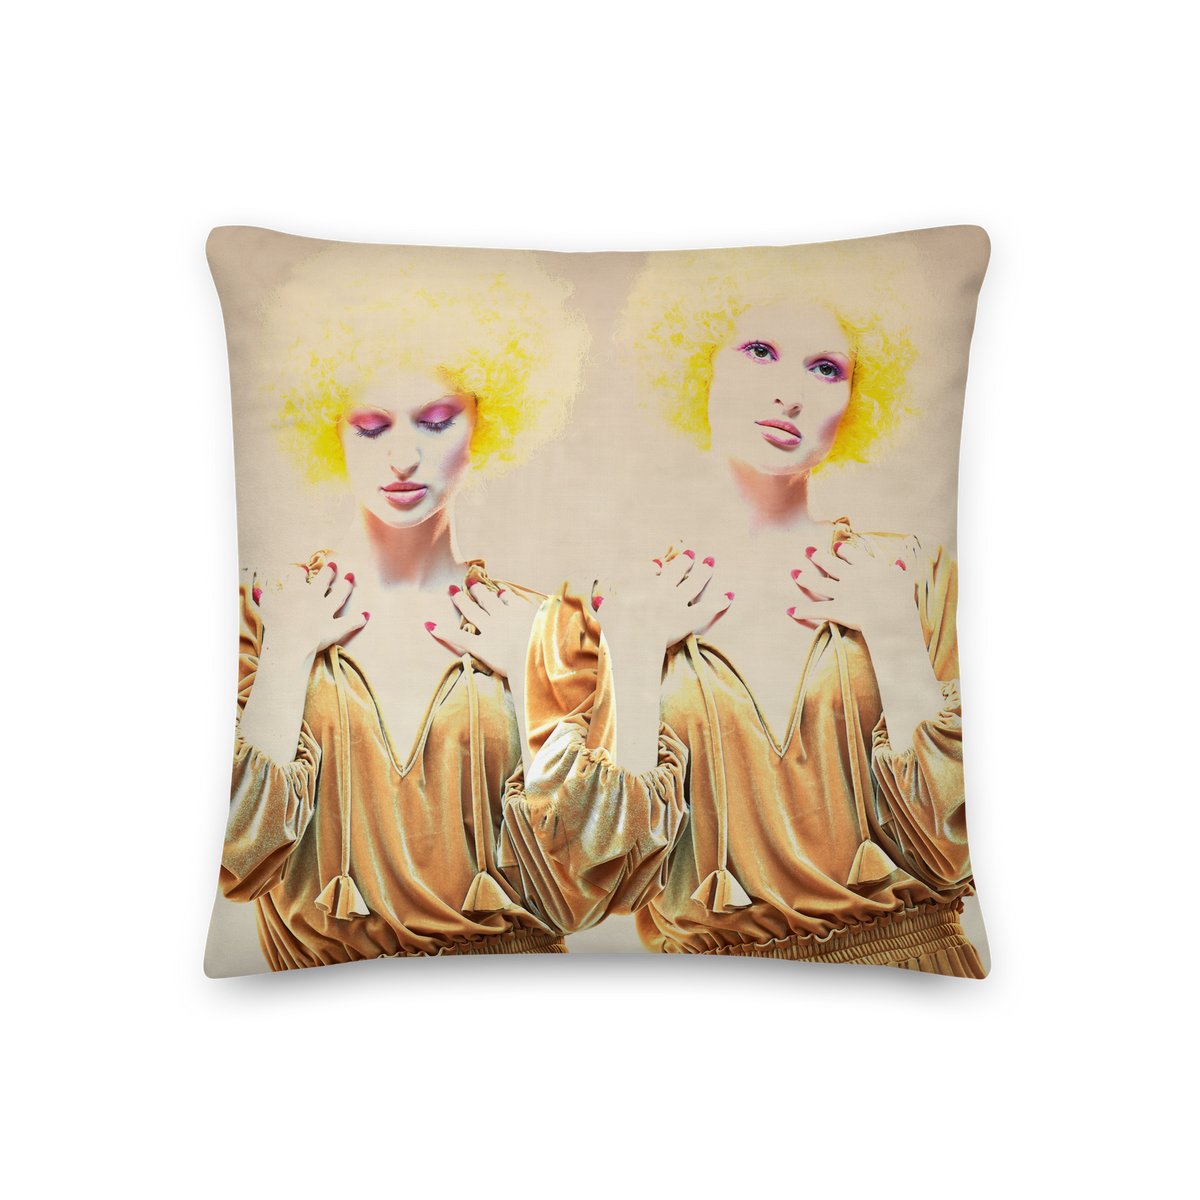 premium pillow with a photo of Gemini twins in a vintage gold dress with yellow curly hair